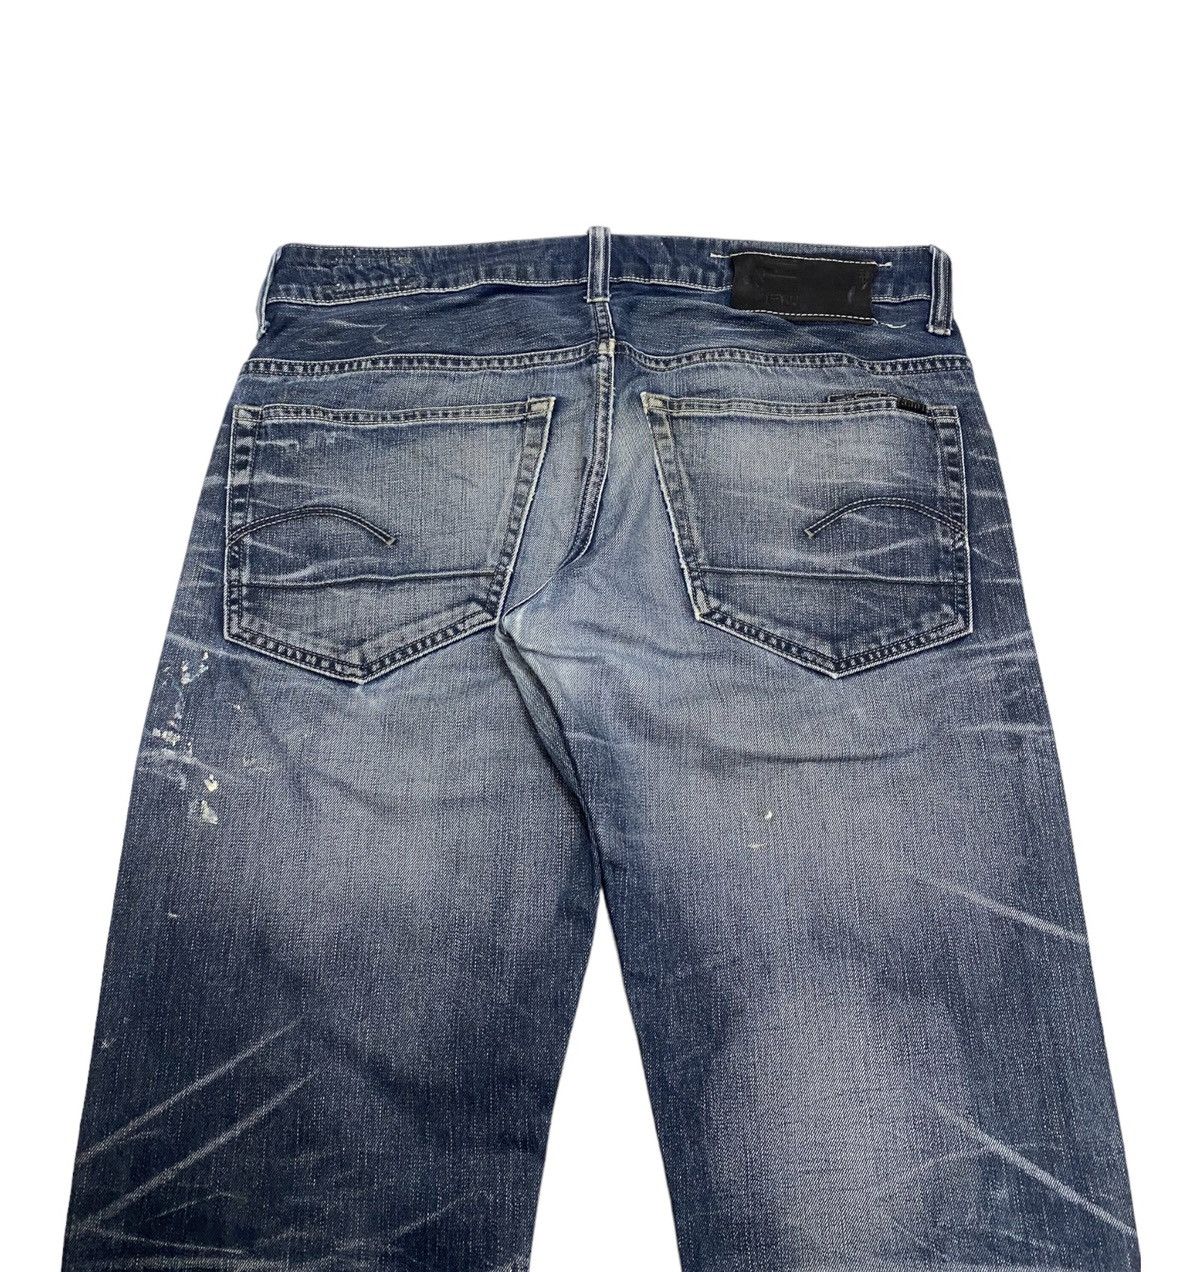 Archival Clothing - G-STAR RAW DISTRESSED PAINTED 3301 UNDERCOVER STYLE JEANS - 6